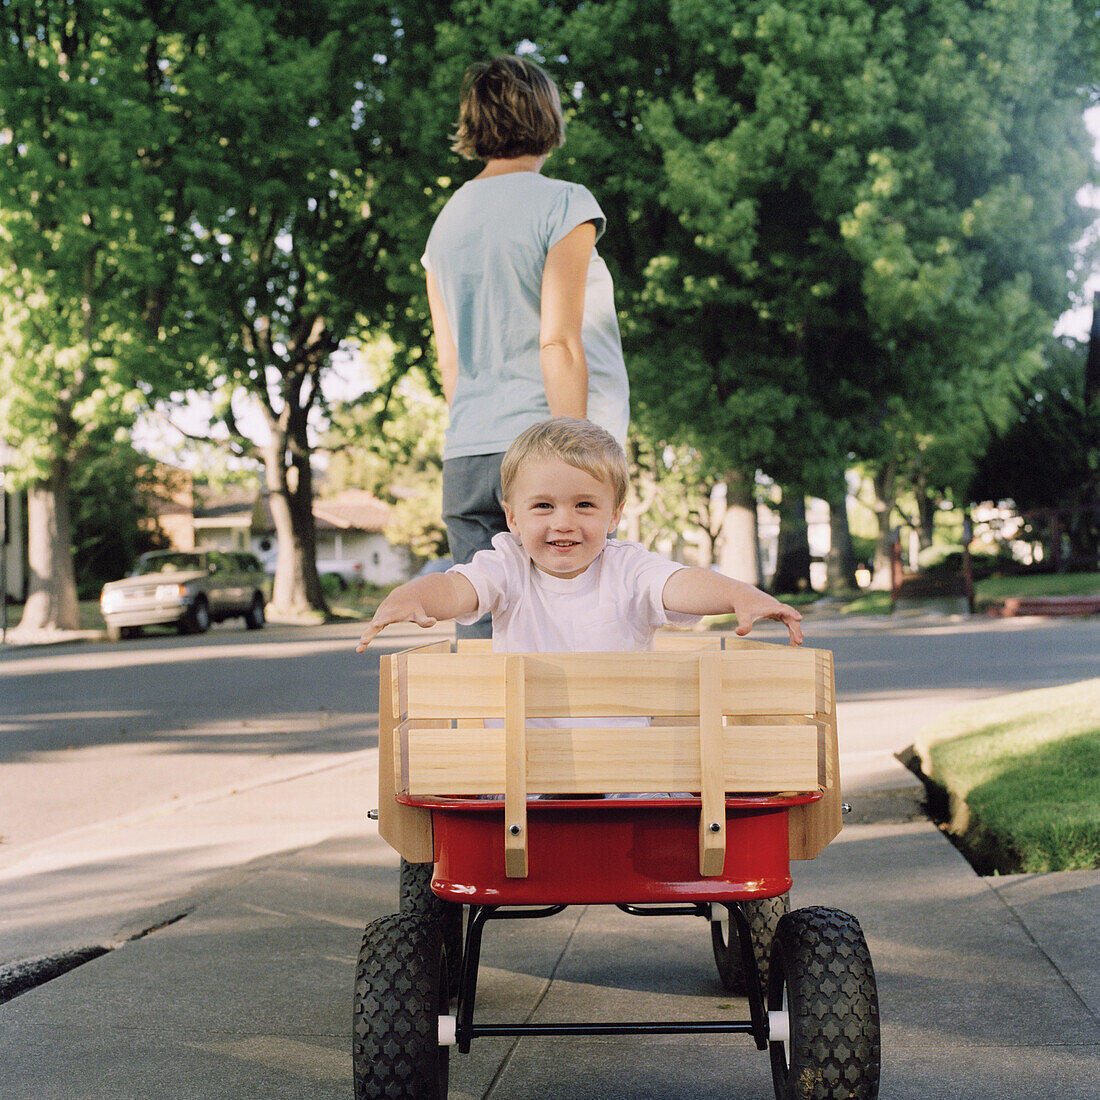 A mother pulling her young son in a wagon, focus on boy